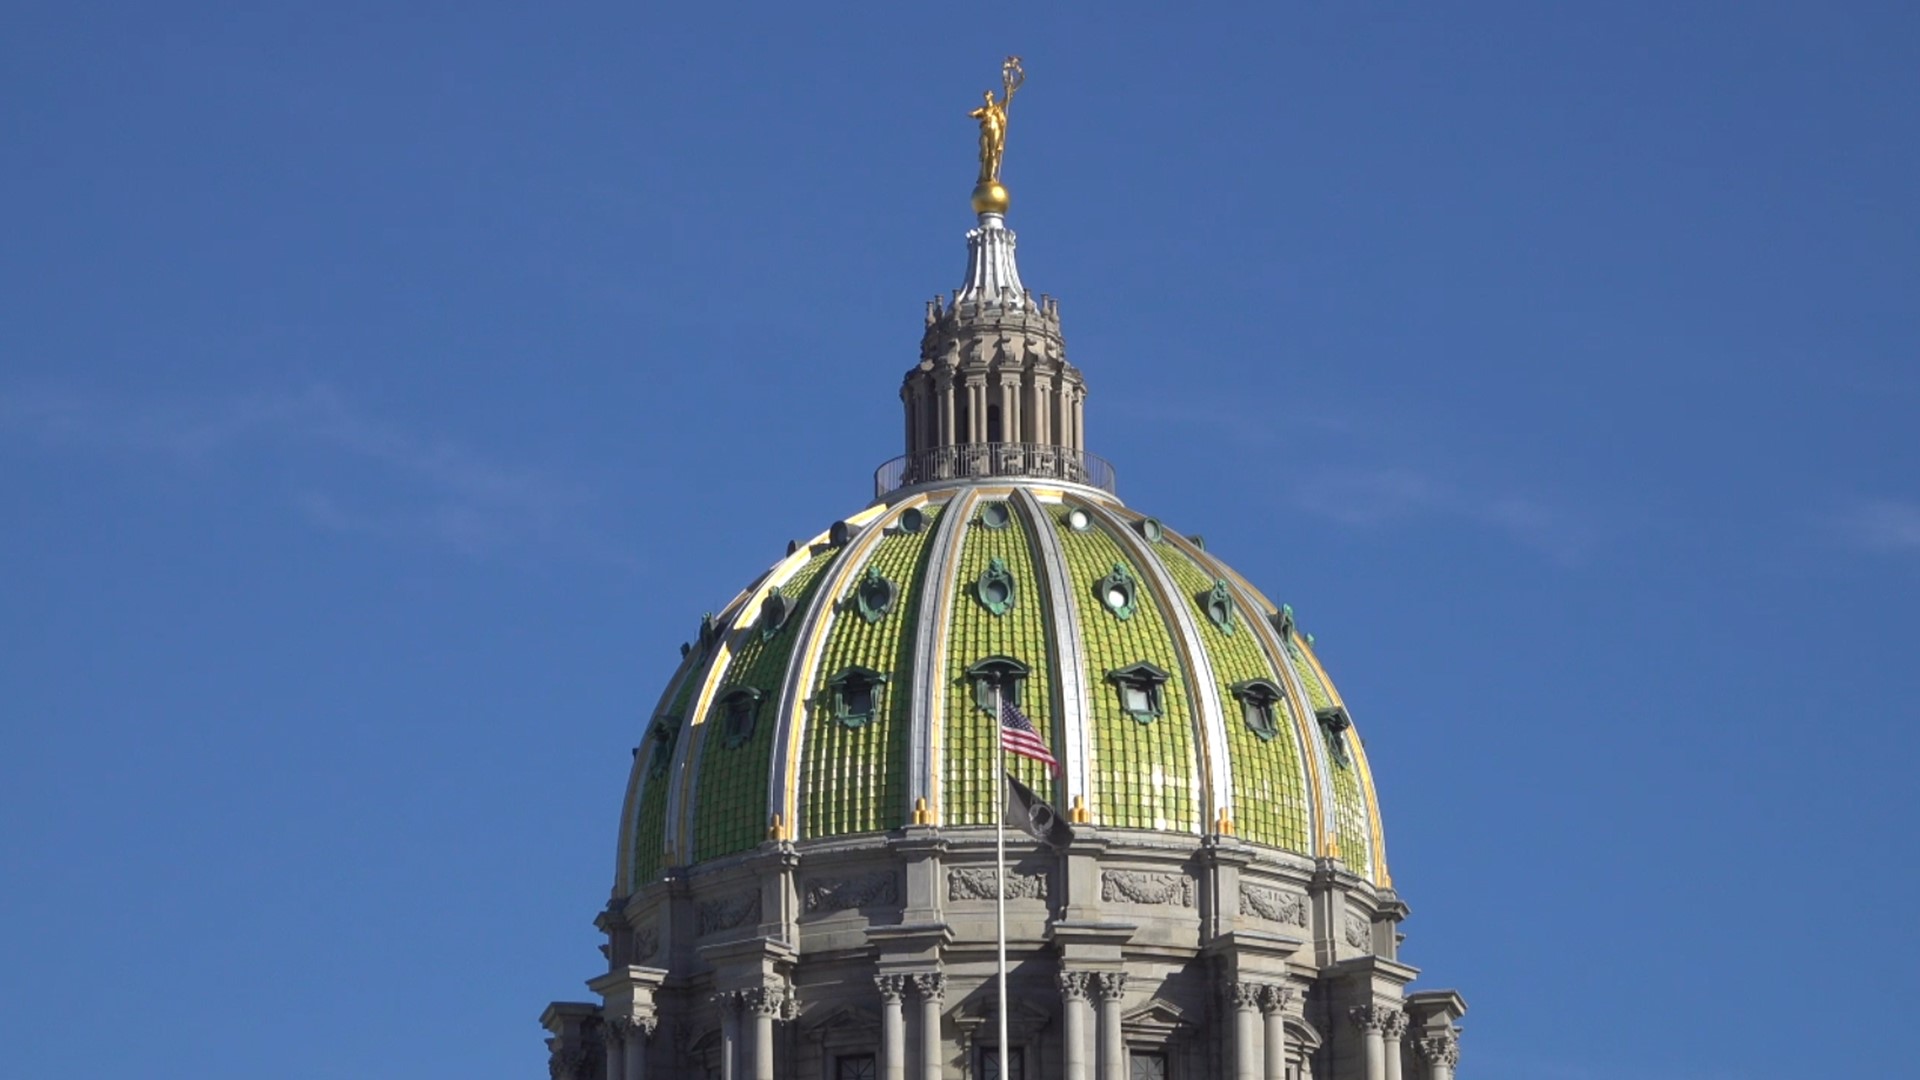 The current legislative session has the most women in Pennsylvania’s history.